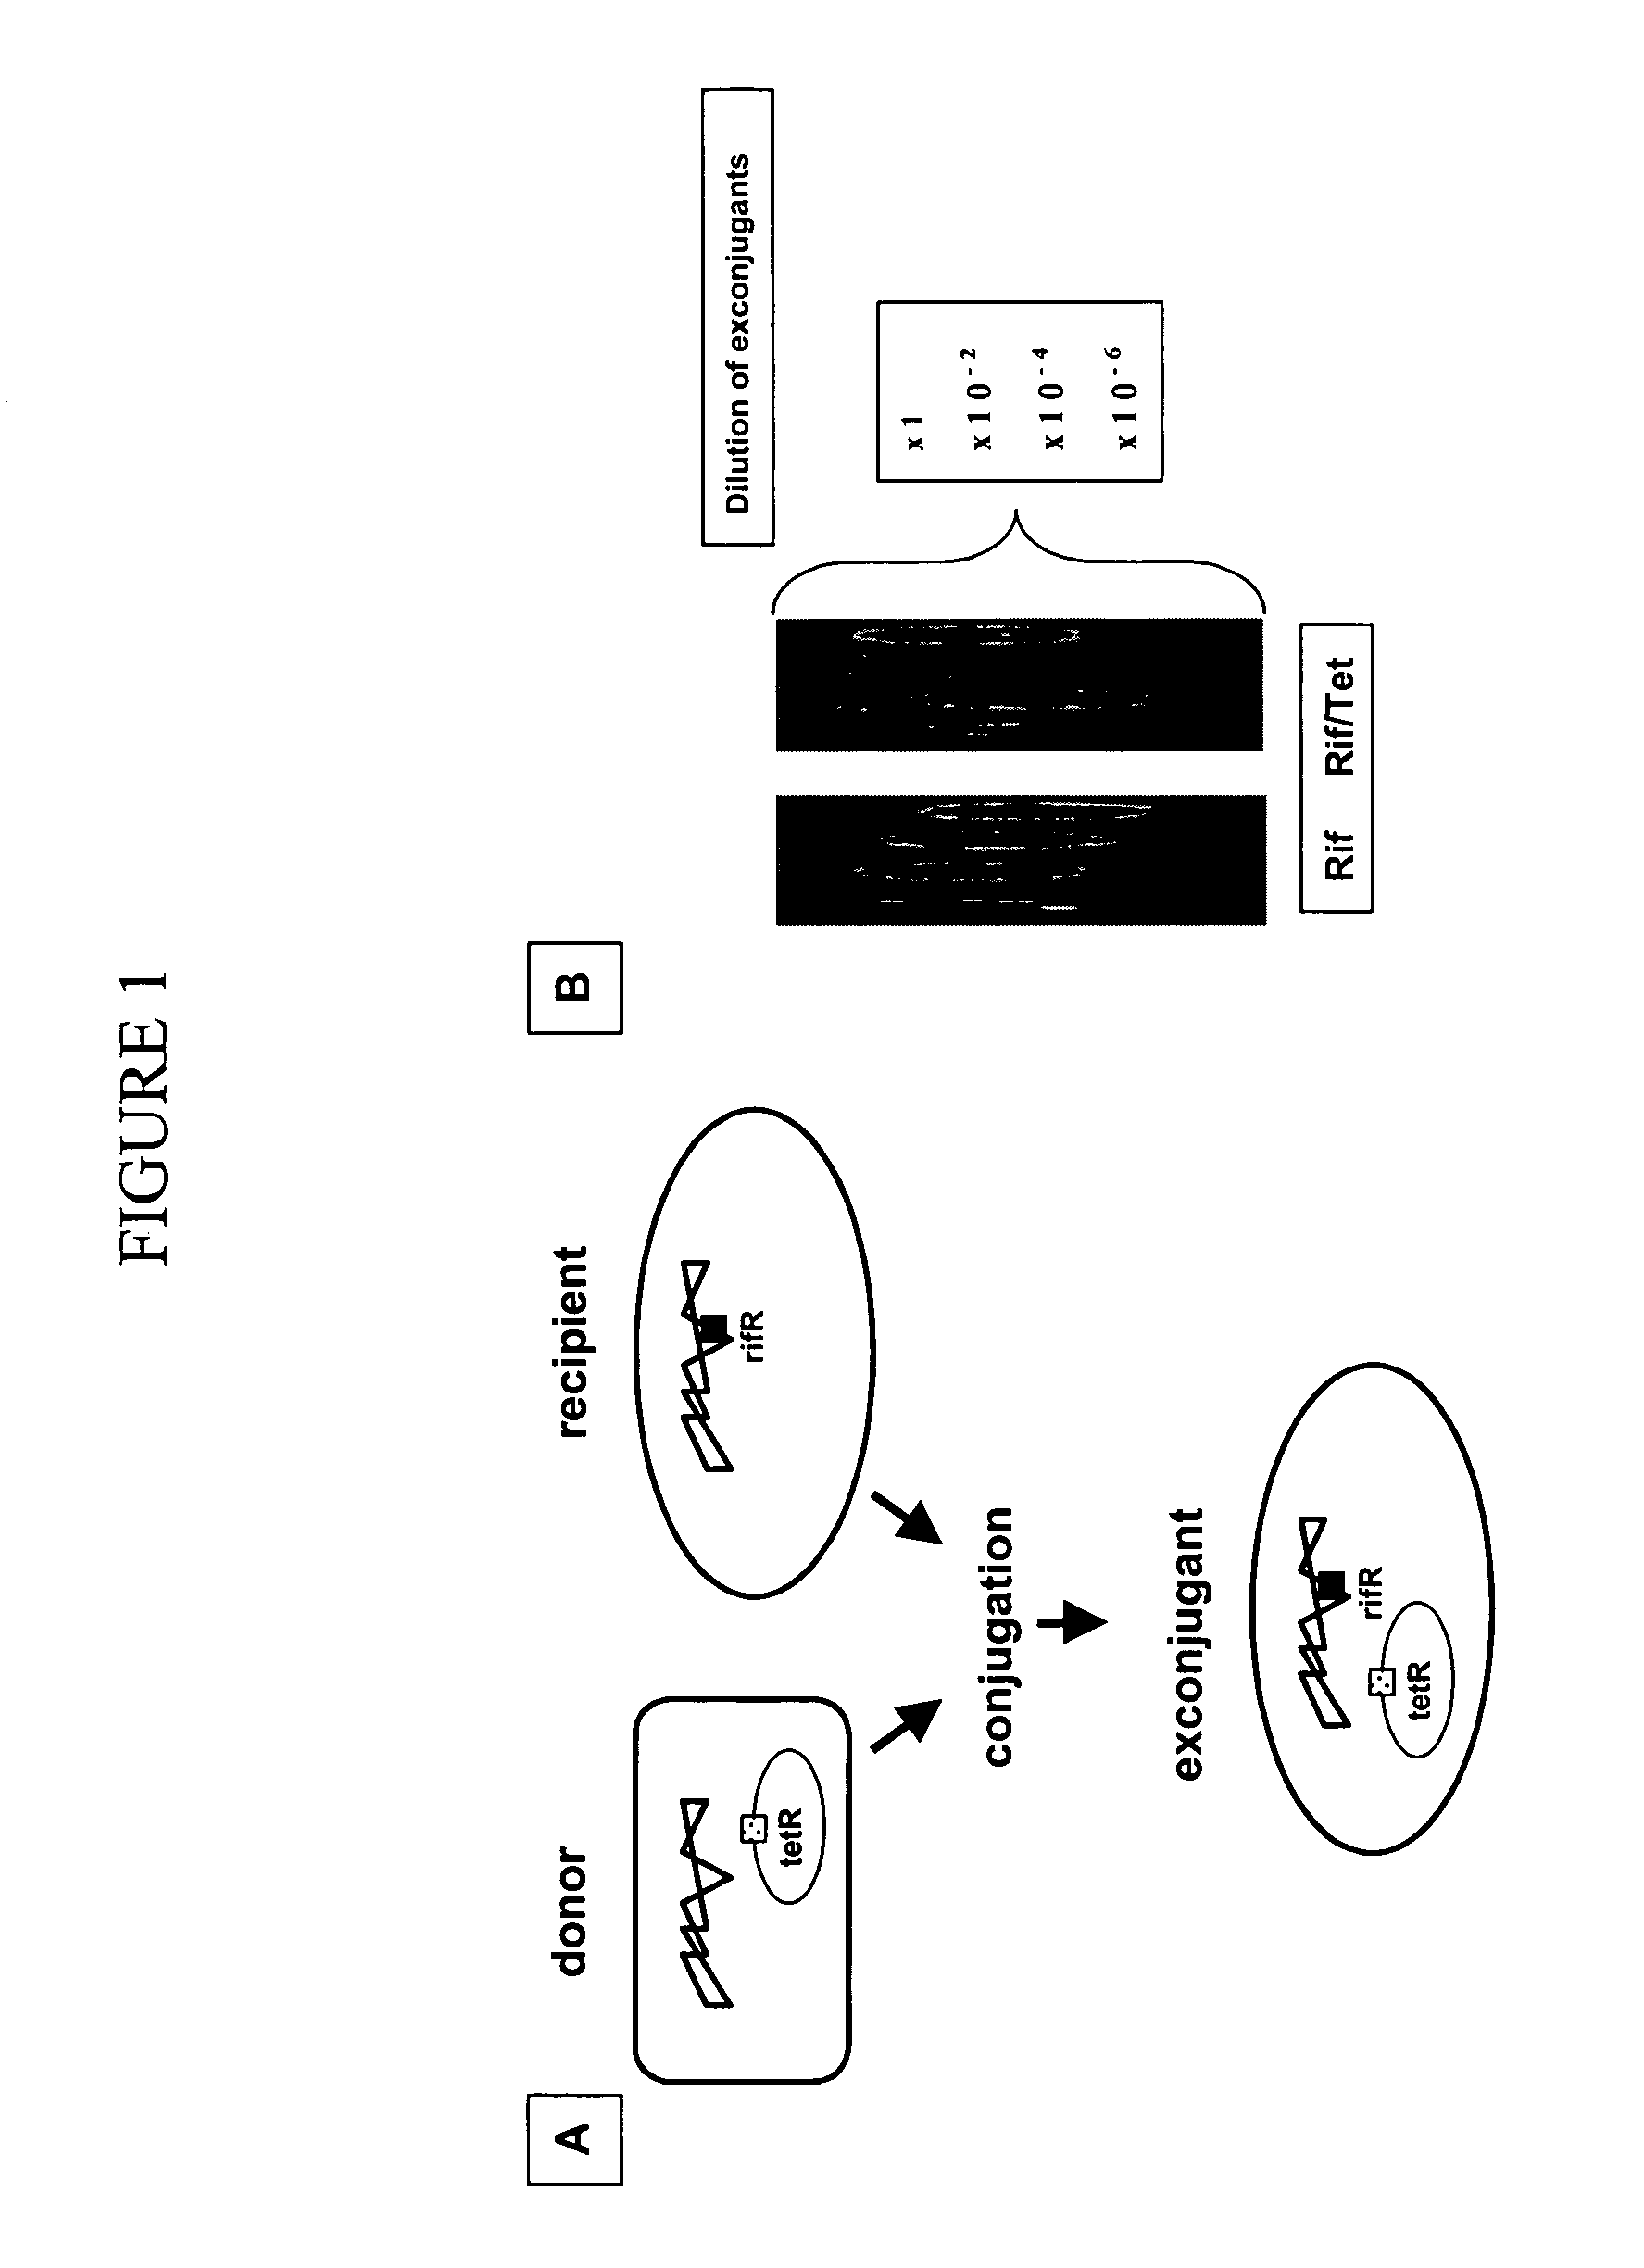 Compositions and methods for treating tissue